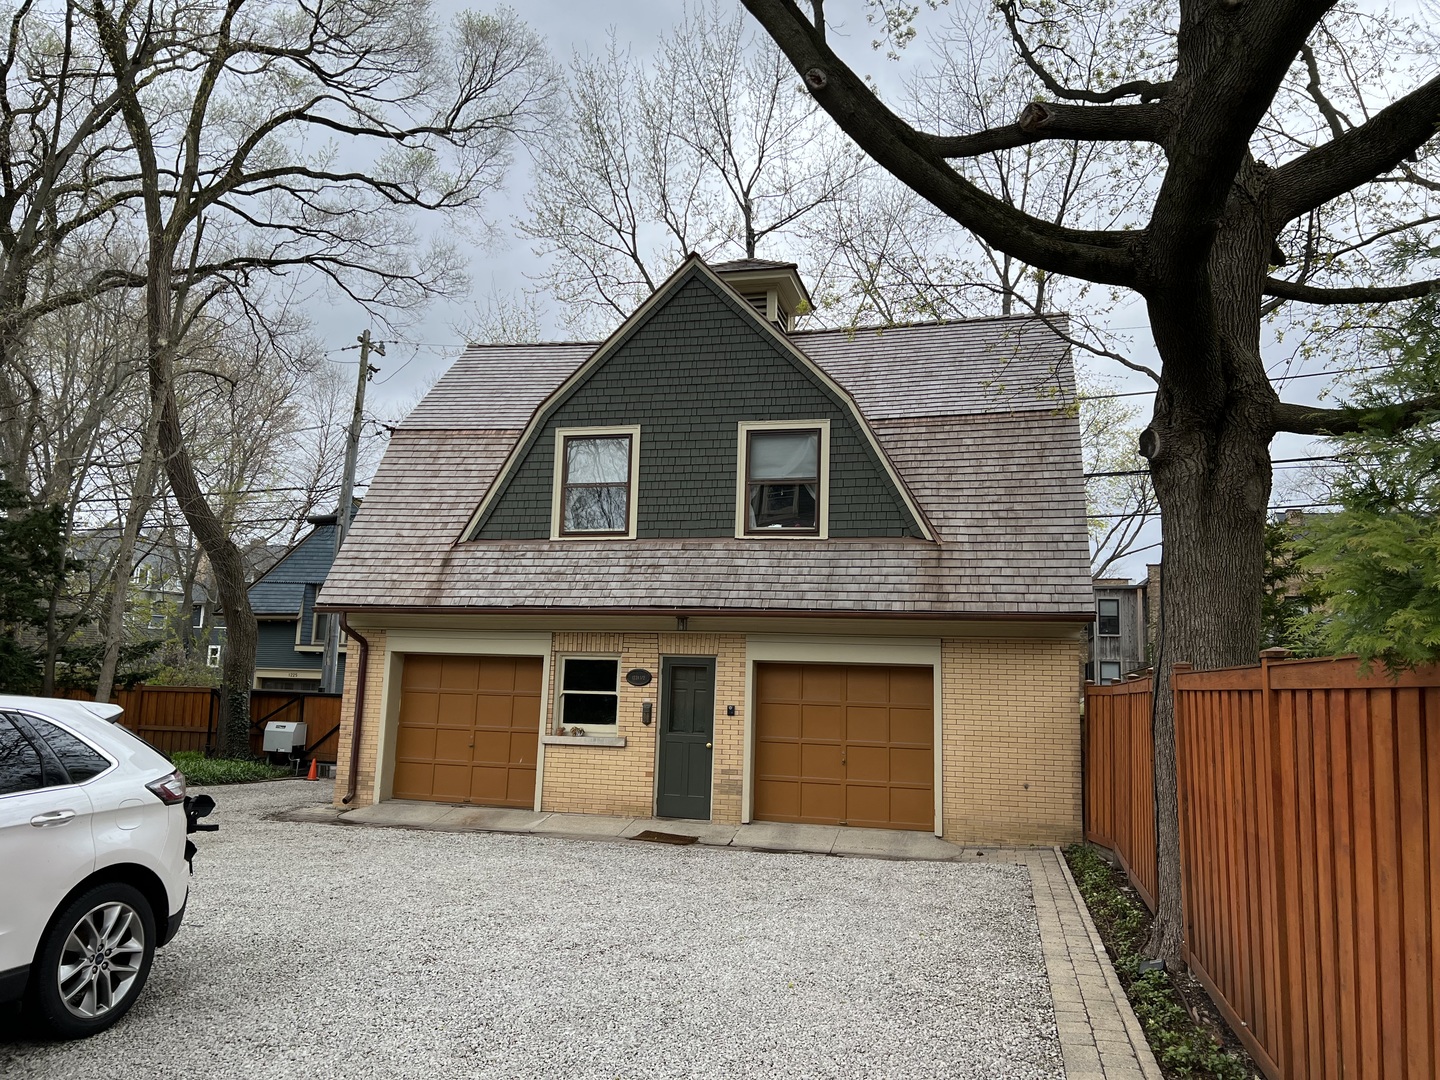 1228 5 Forest Ave, Evanston, IL 60202 - MLS 11397008 - Coldwell Banker